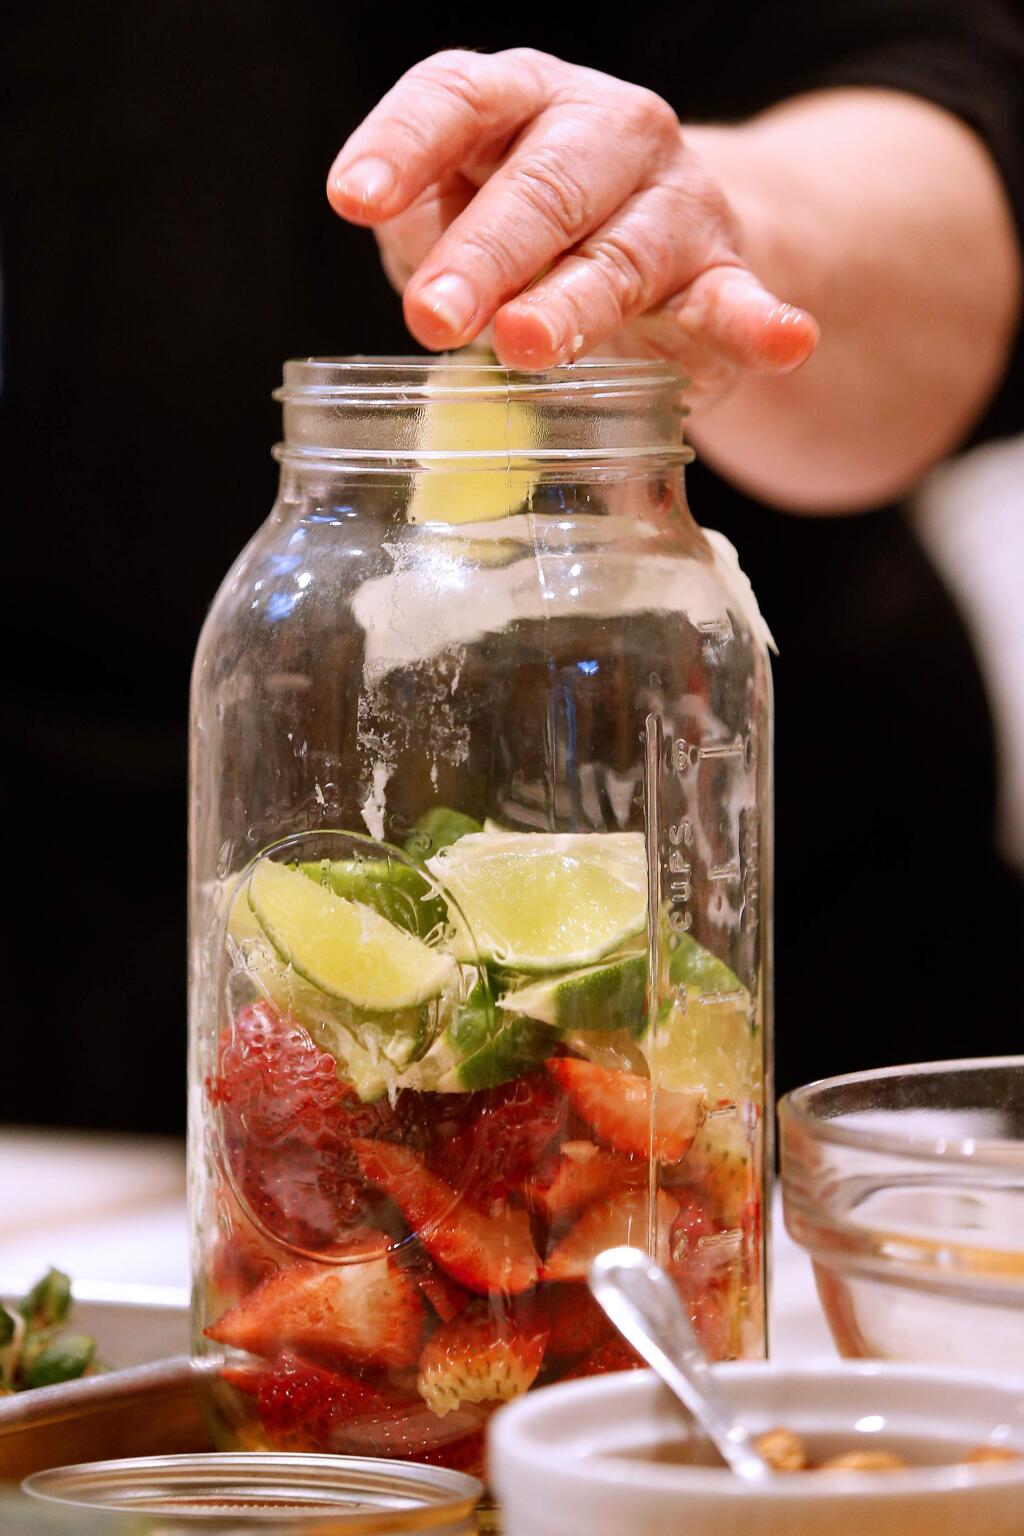 Tami Henris drops lime slices into a jar with strawberries to make a strawberry balsamic smash cocktails during a springtime cocktail party class with chef Julie Steinfeld at Ramekins culinary school in Sonoma, California, on Thursday, April 19, 2018. (Alvin Jornada / The Press Democrat)